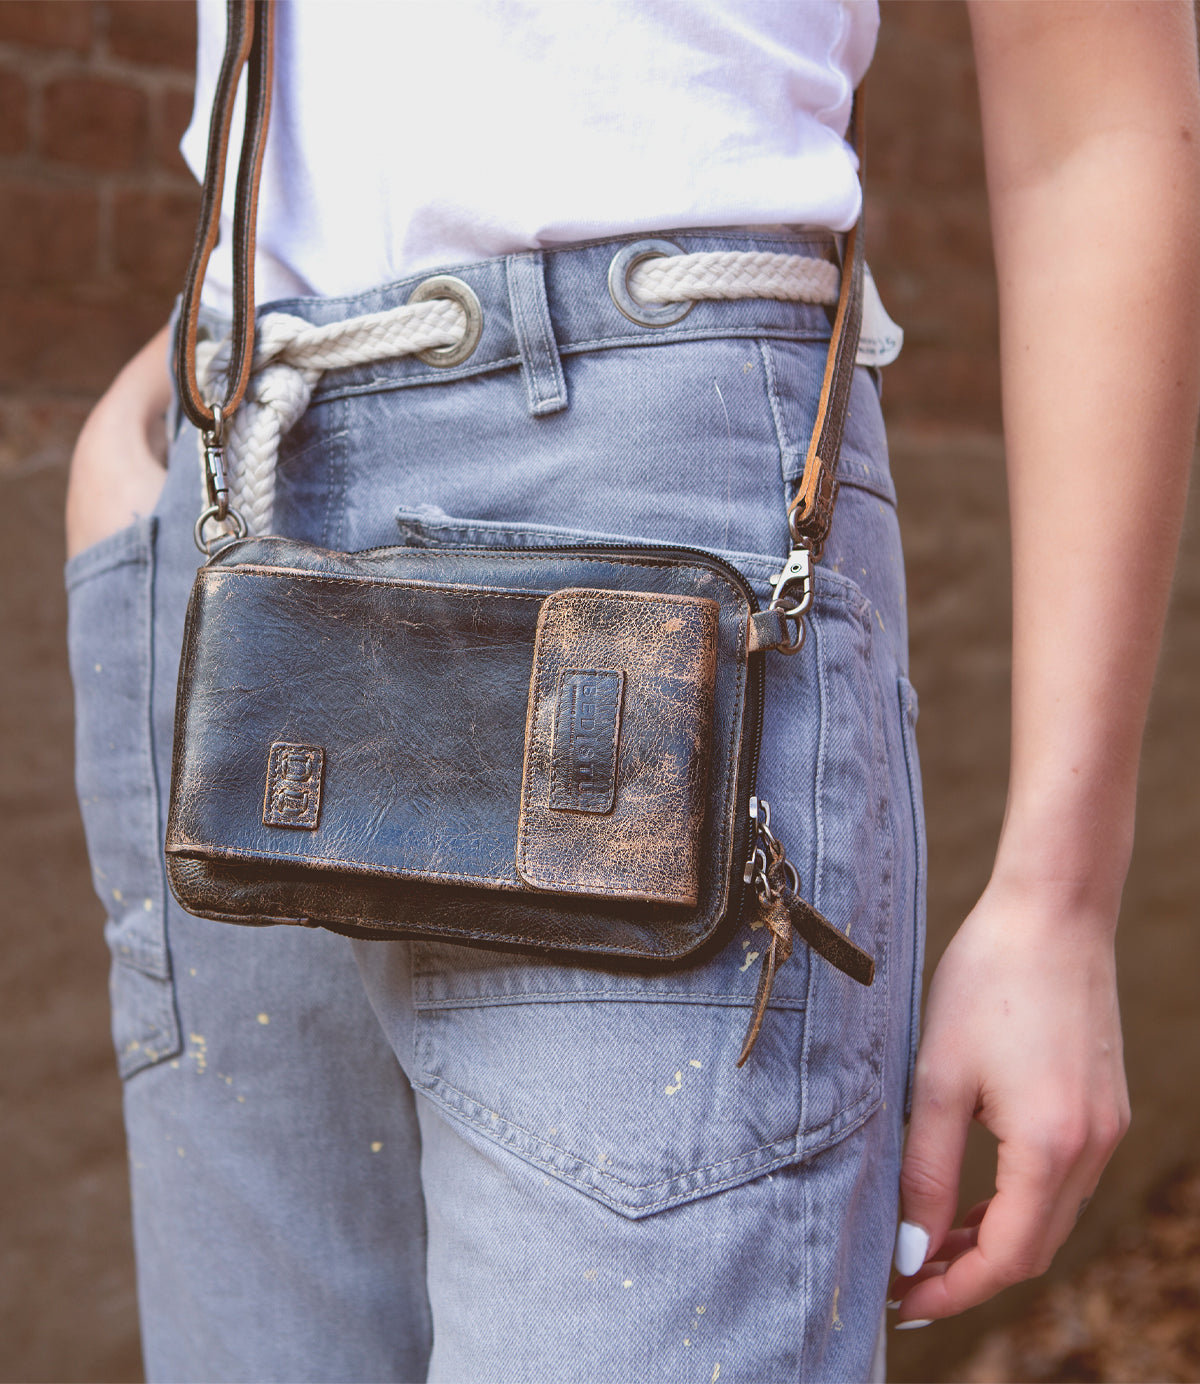 A woman wearing jeans and a Bed Stu Alelike premium leather crossbody bag.